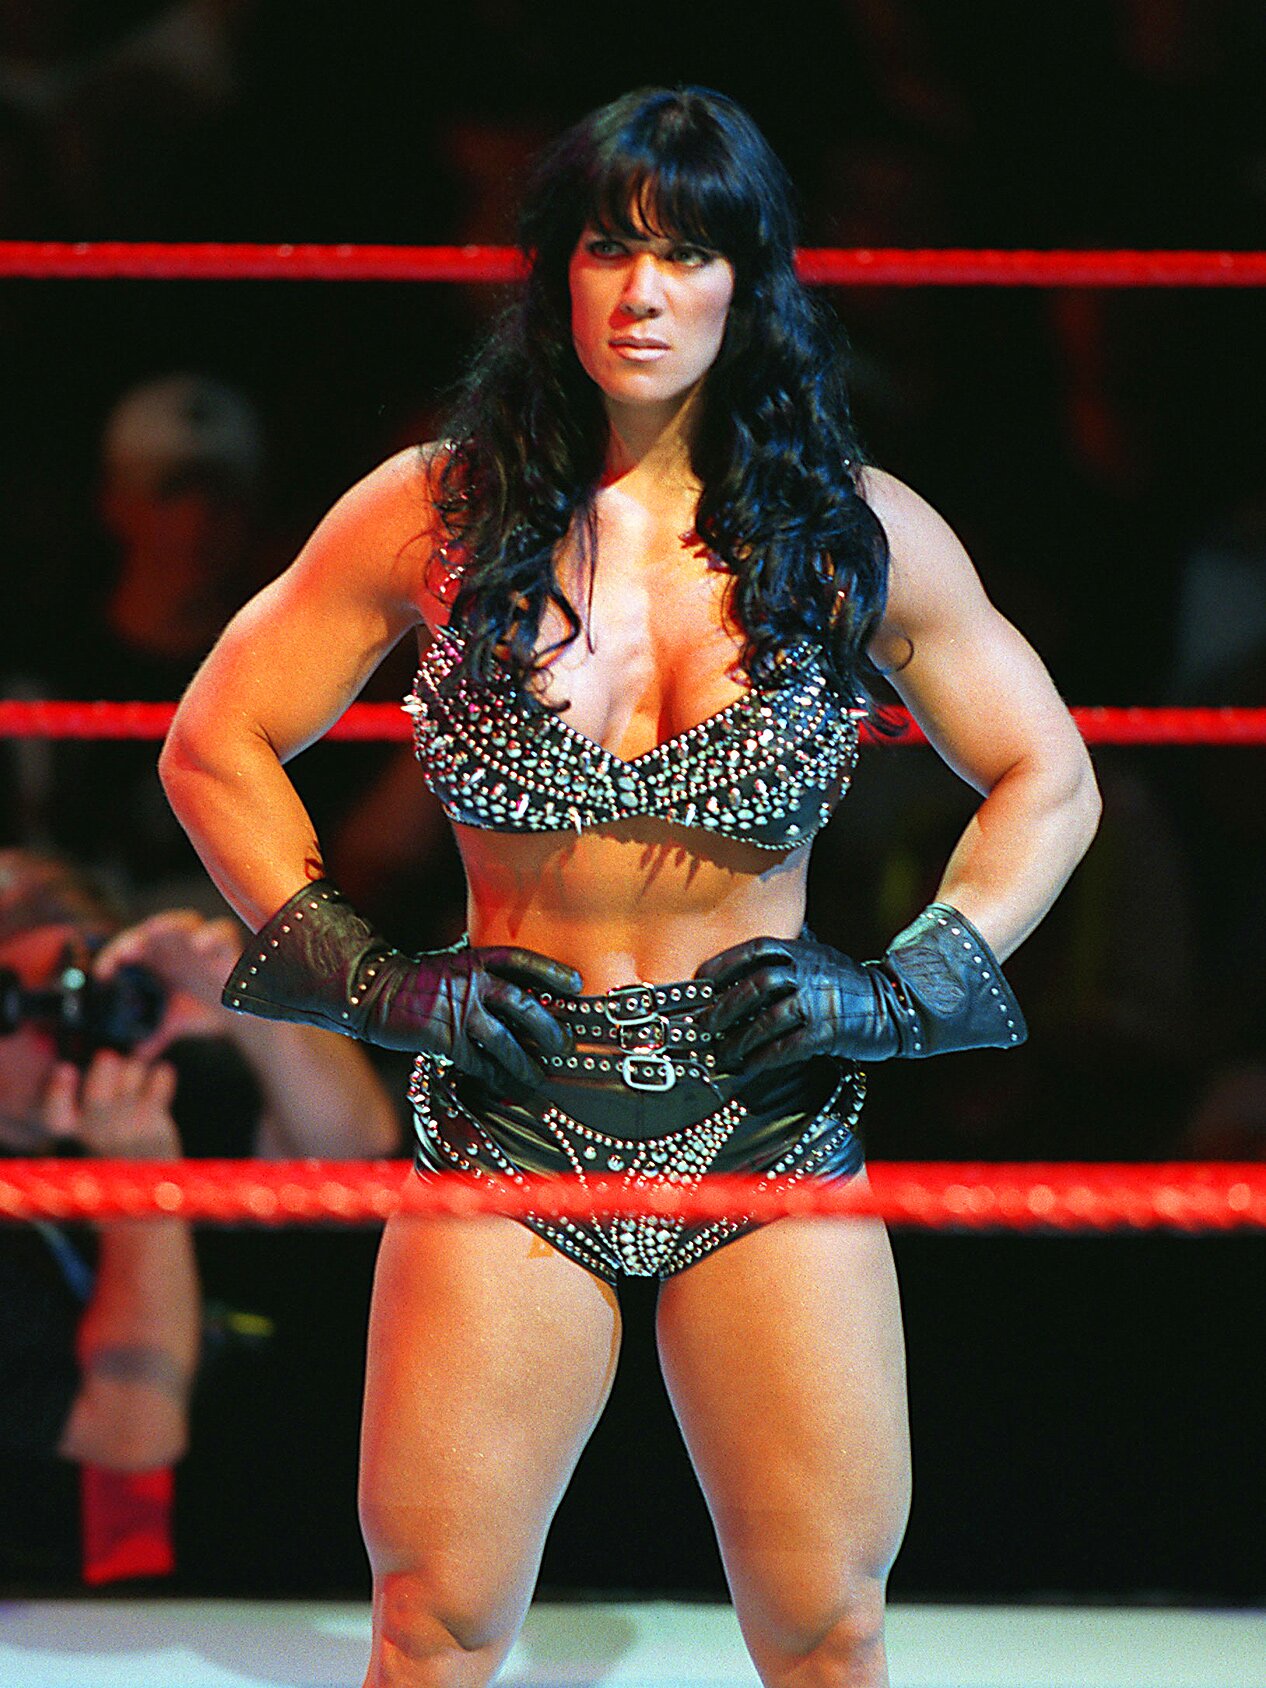 WATCH: Vice for Documentary About WWE Legend Chyna